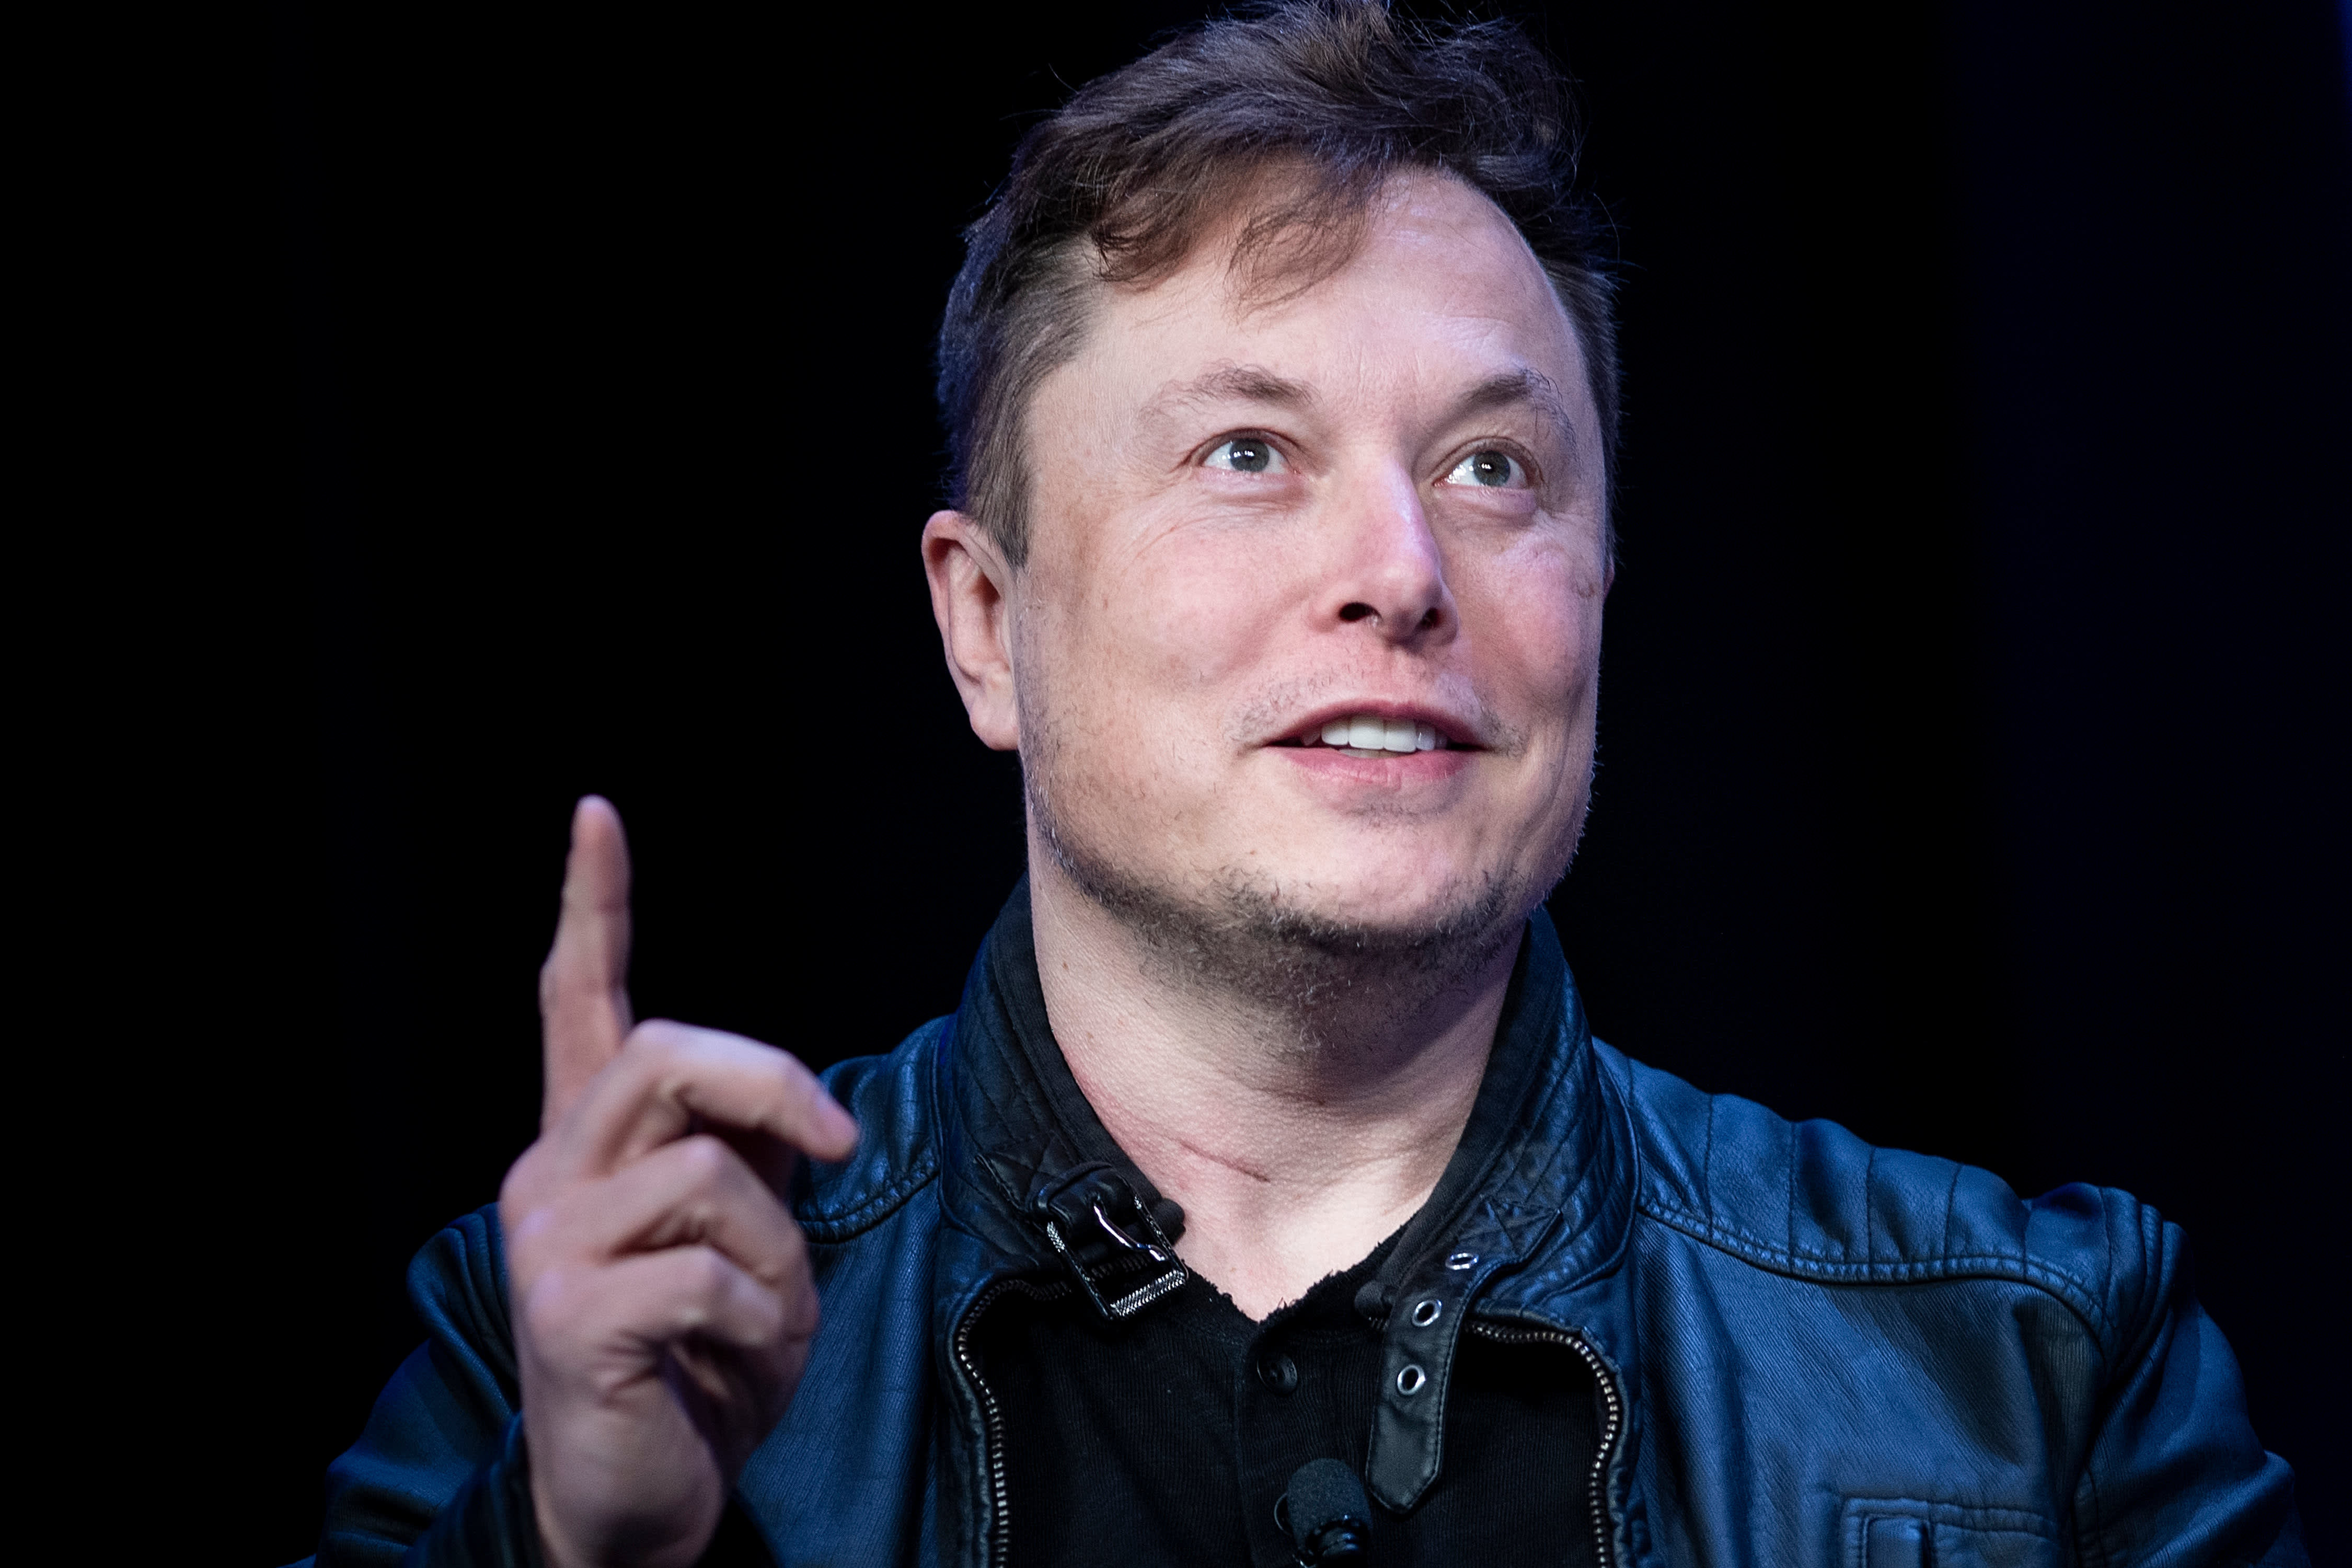 Career young Elon Musk thought he would pursue